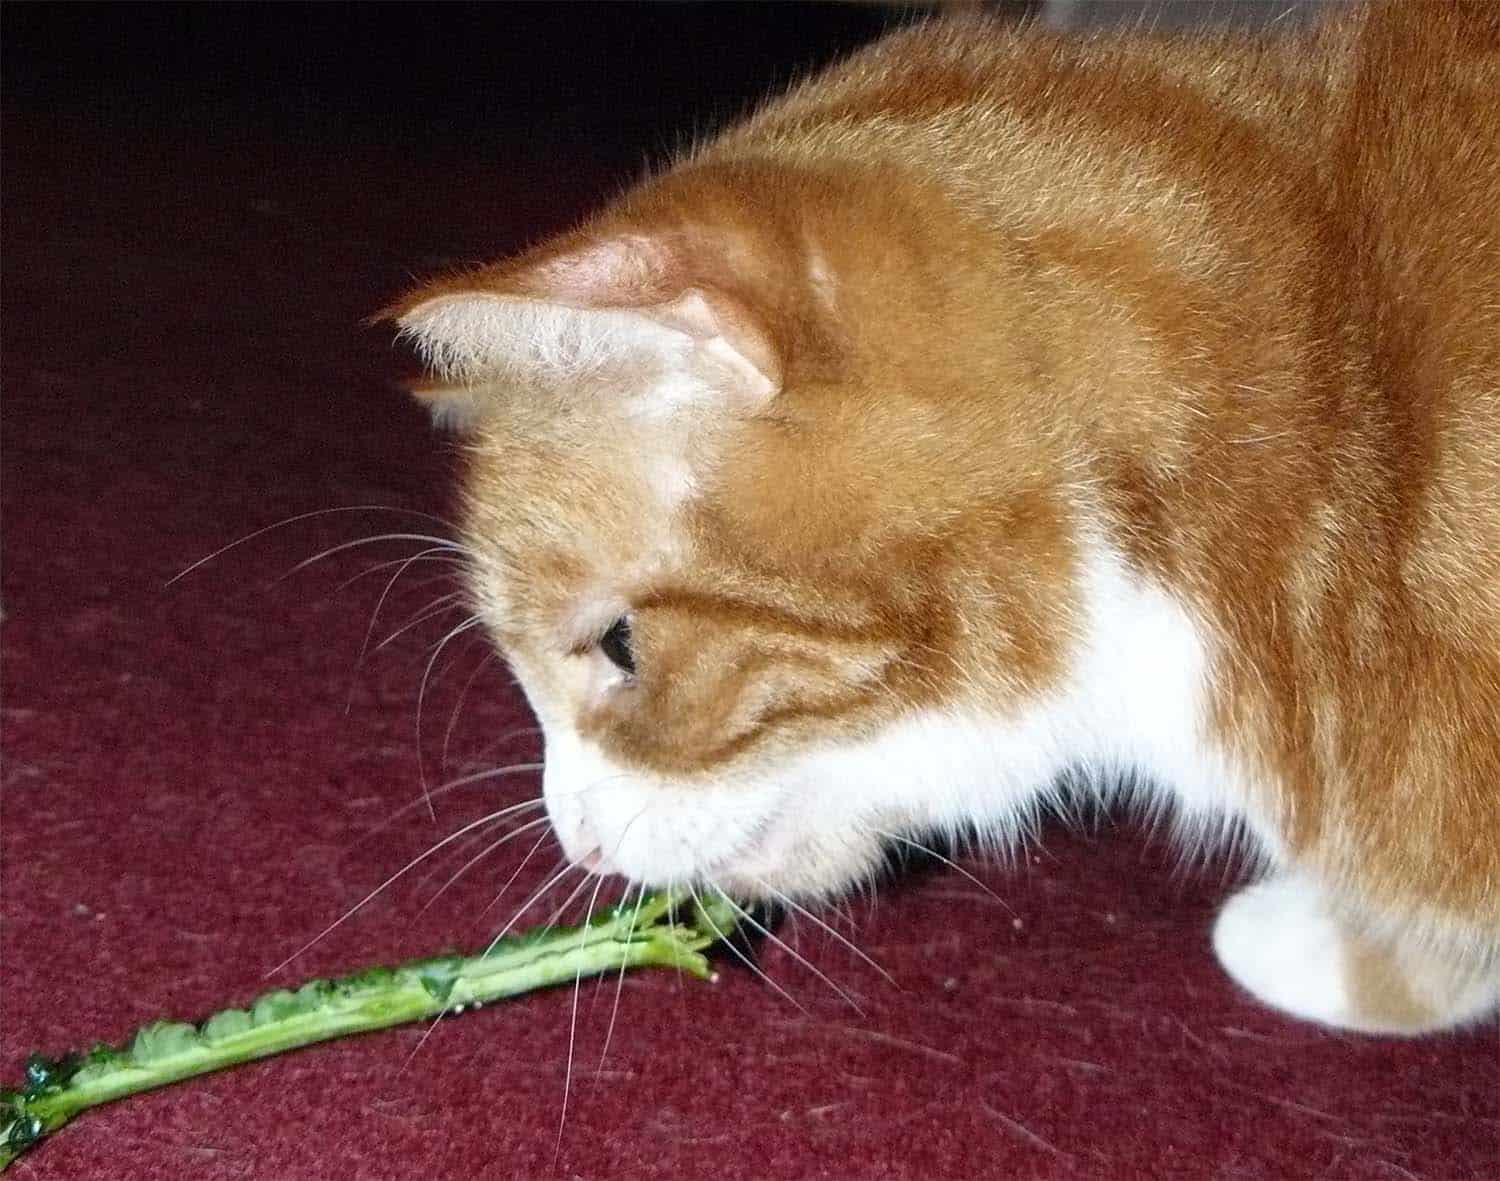 Can Cats Eat Kale?